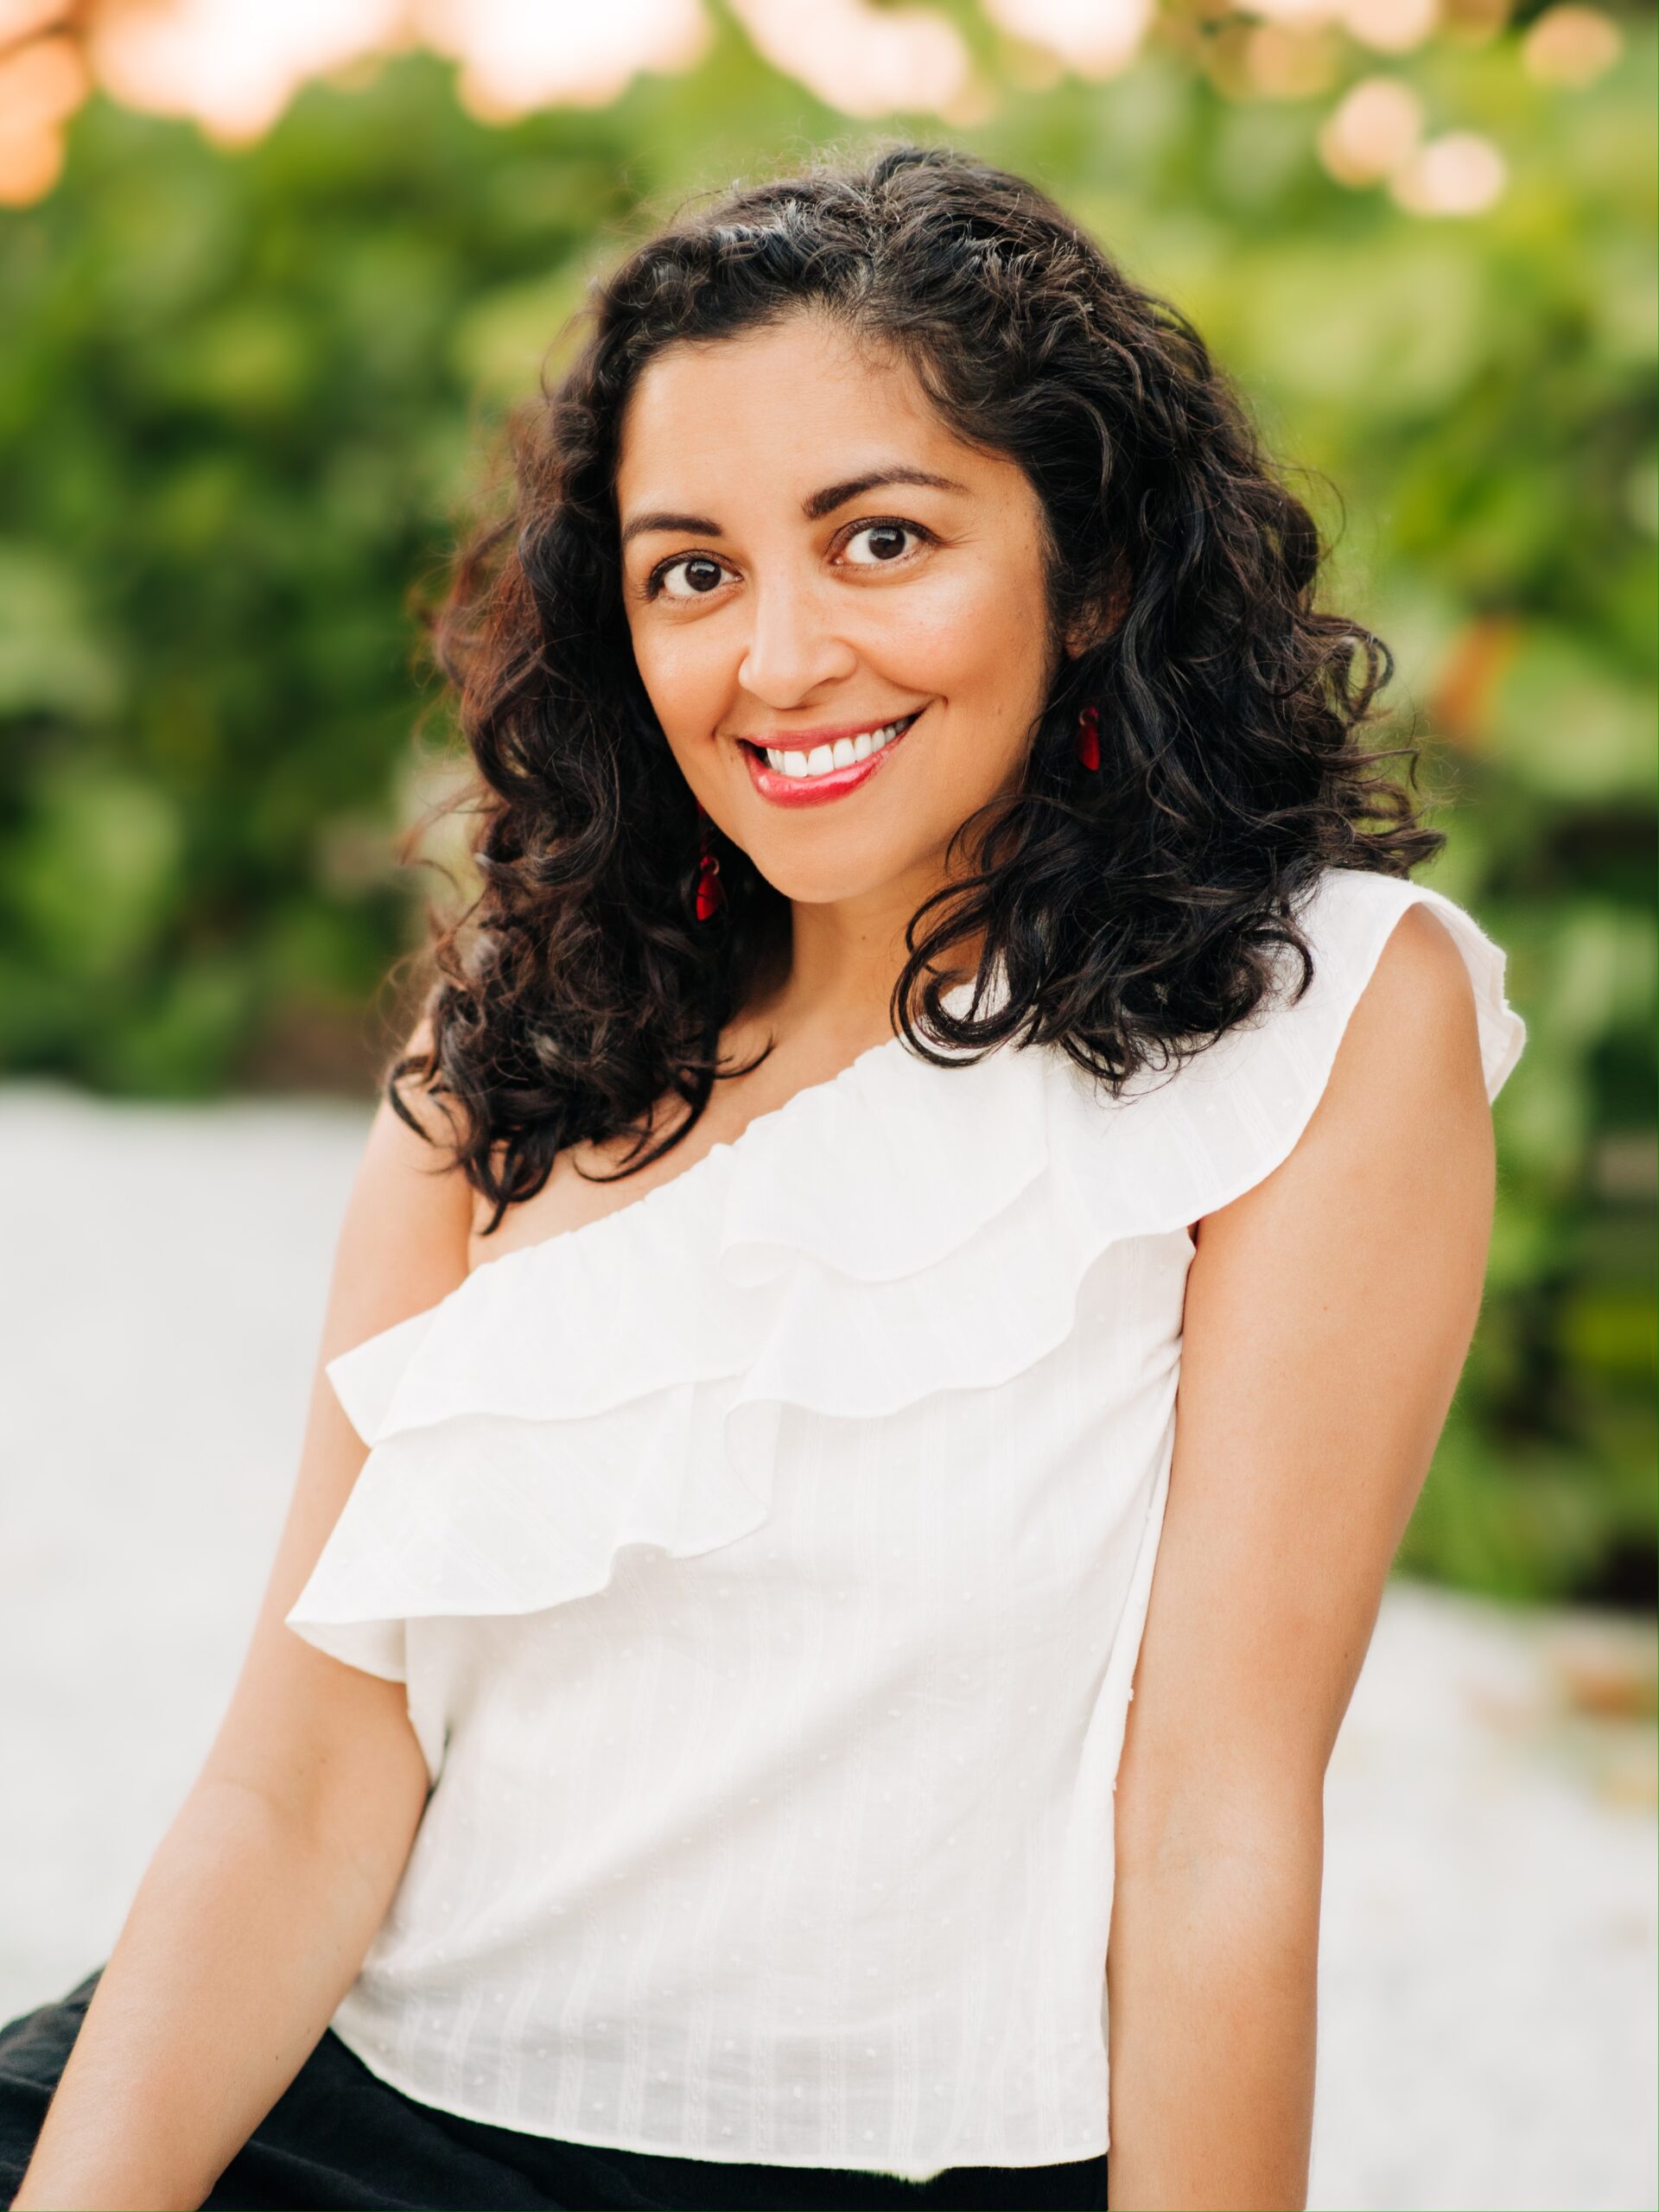 We are very excited to announce that Aimee Nezhukumatathil will judge our 2023 Book Prize in poetry!